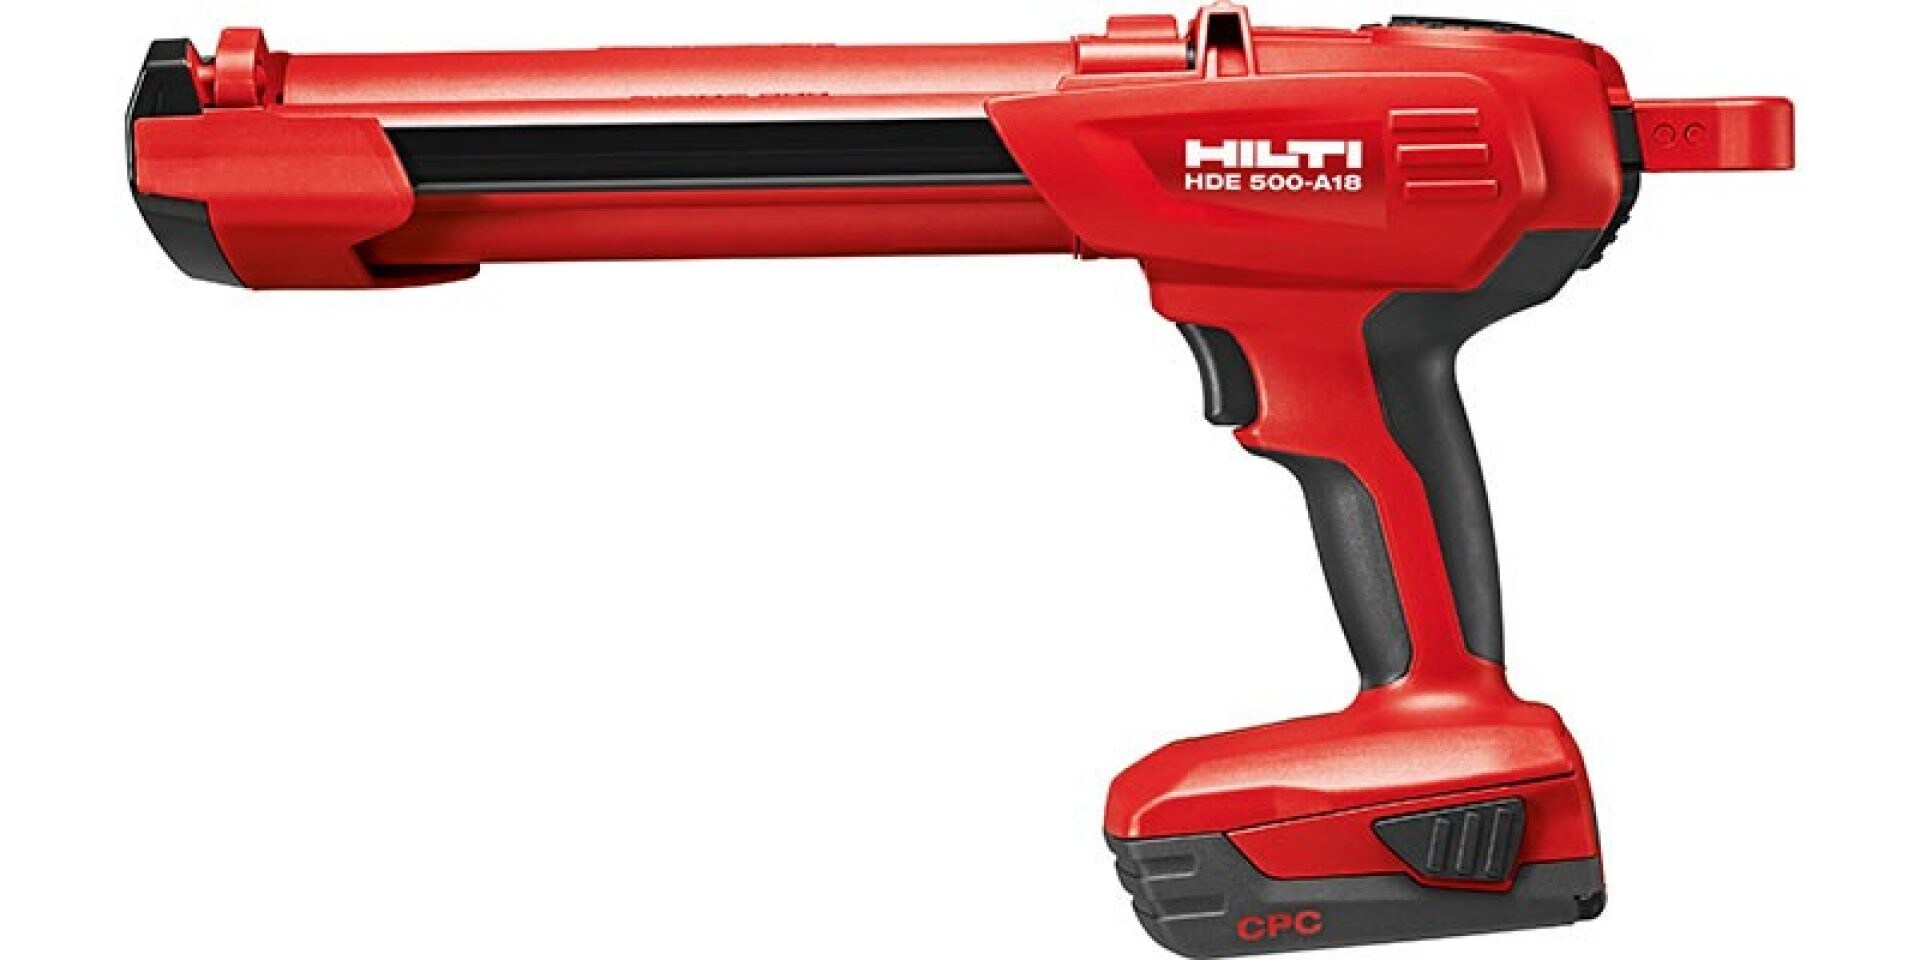 HDE 500-A22 cordless battery dispenser as part of the Hilti SafeSet system